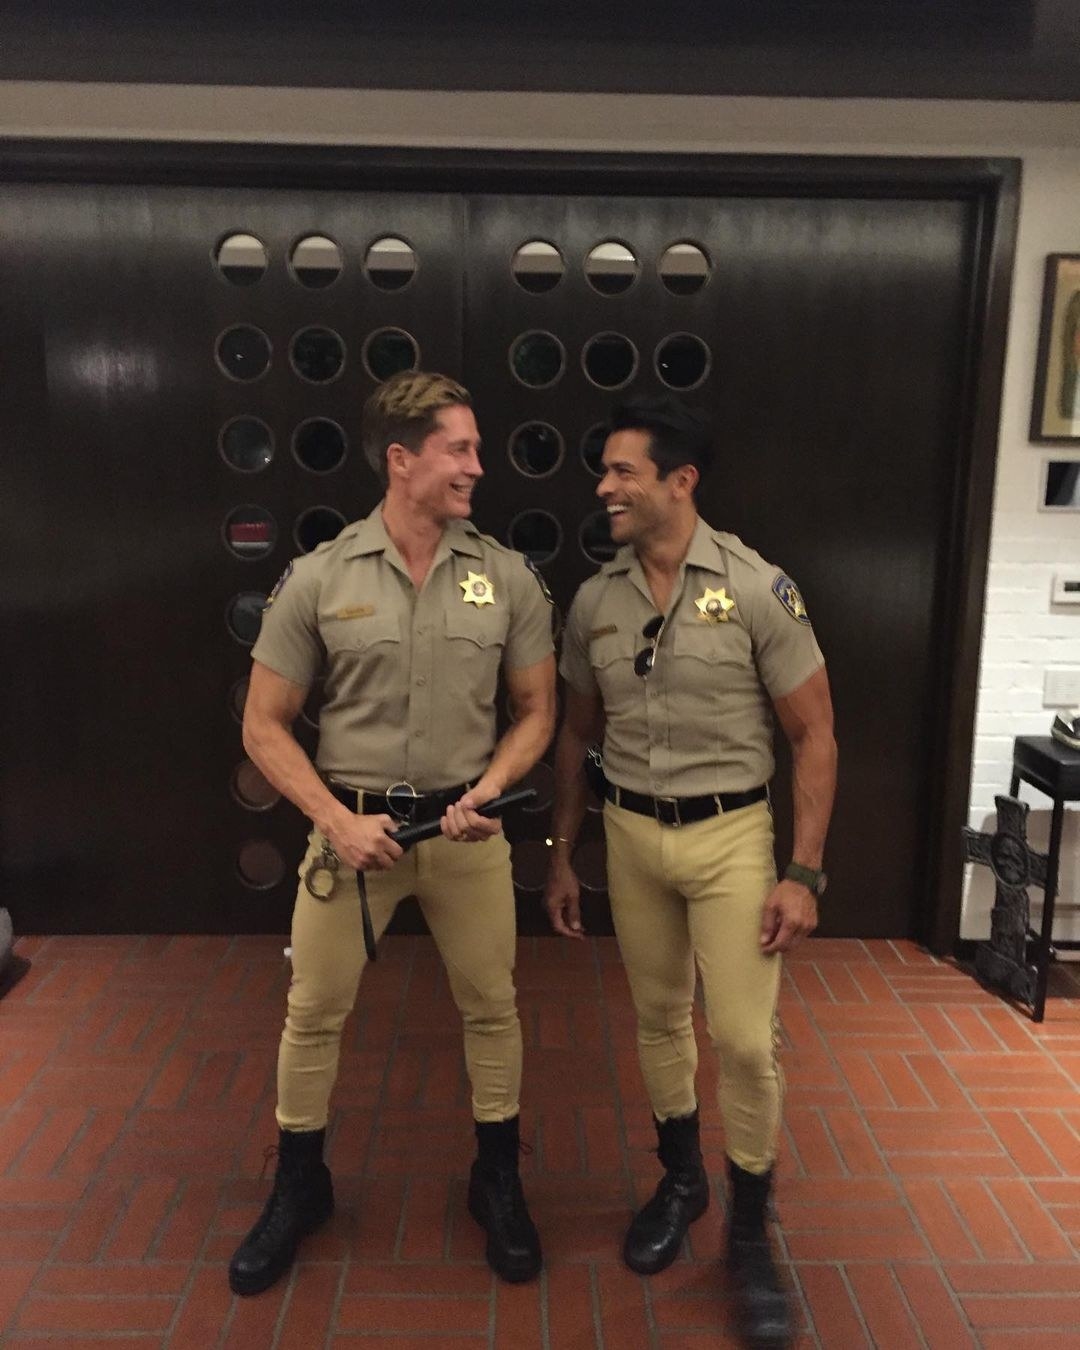 Mark Consuelos posing in an law enforcement costume next to a man wearing a similar outfit